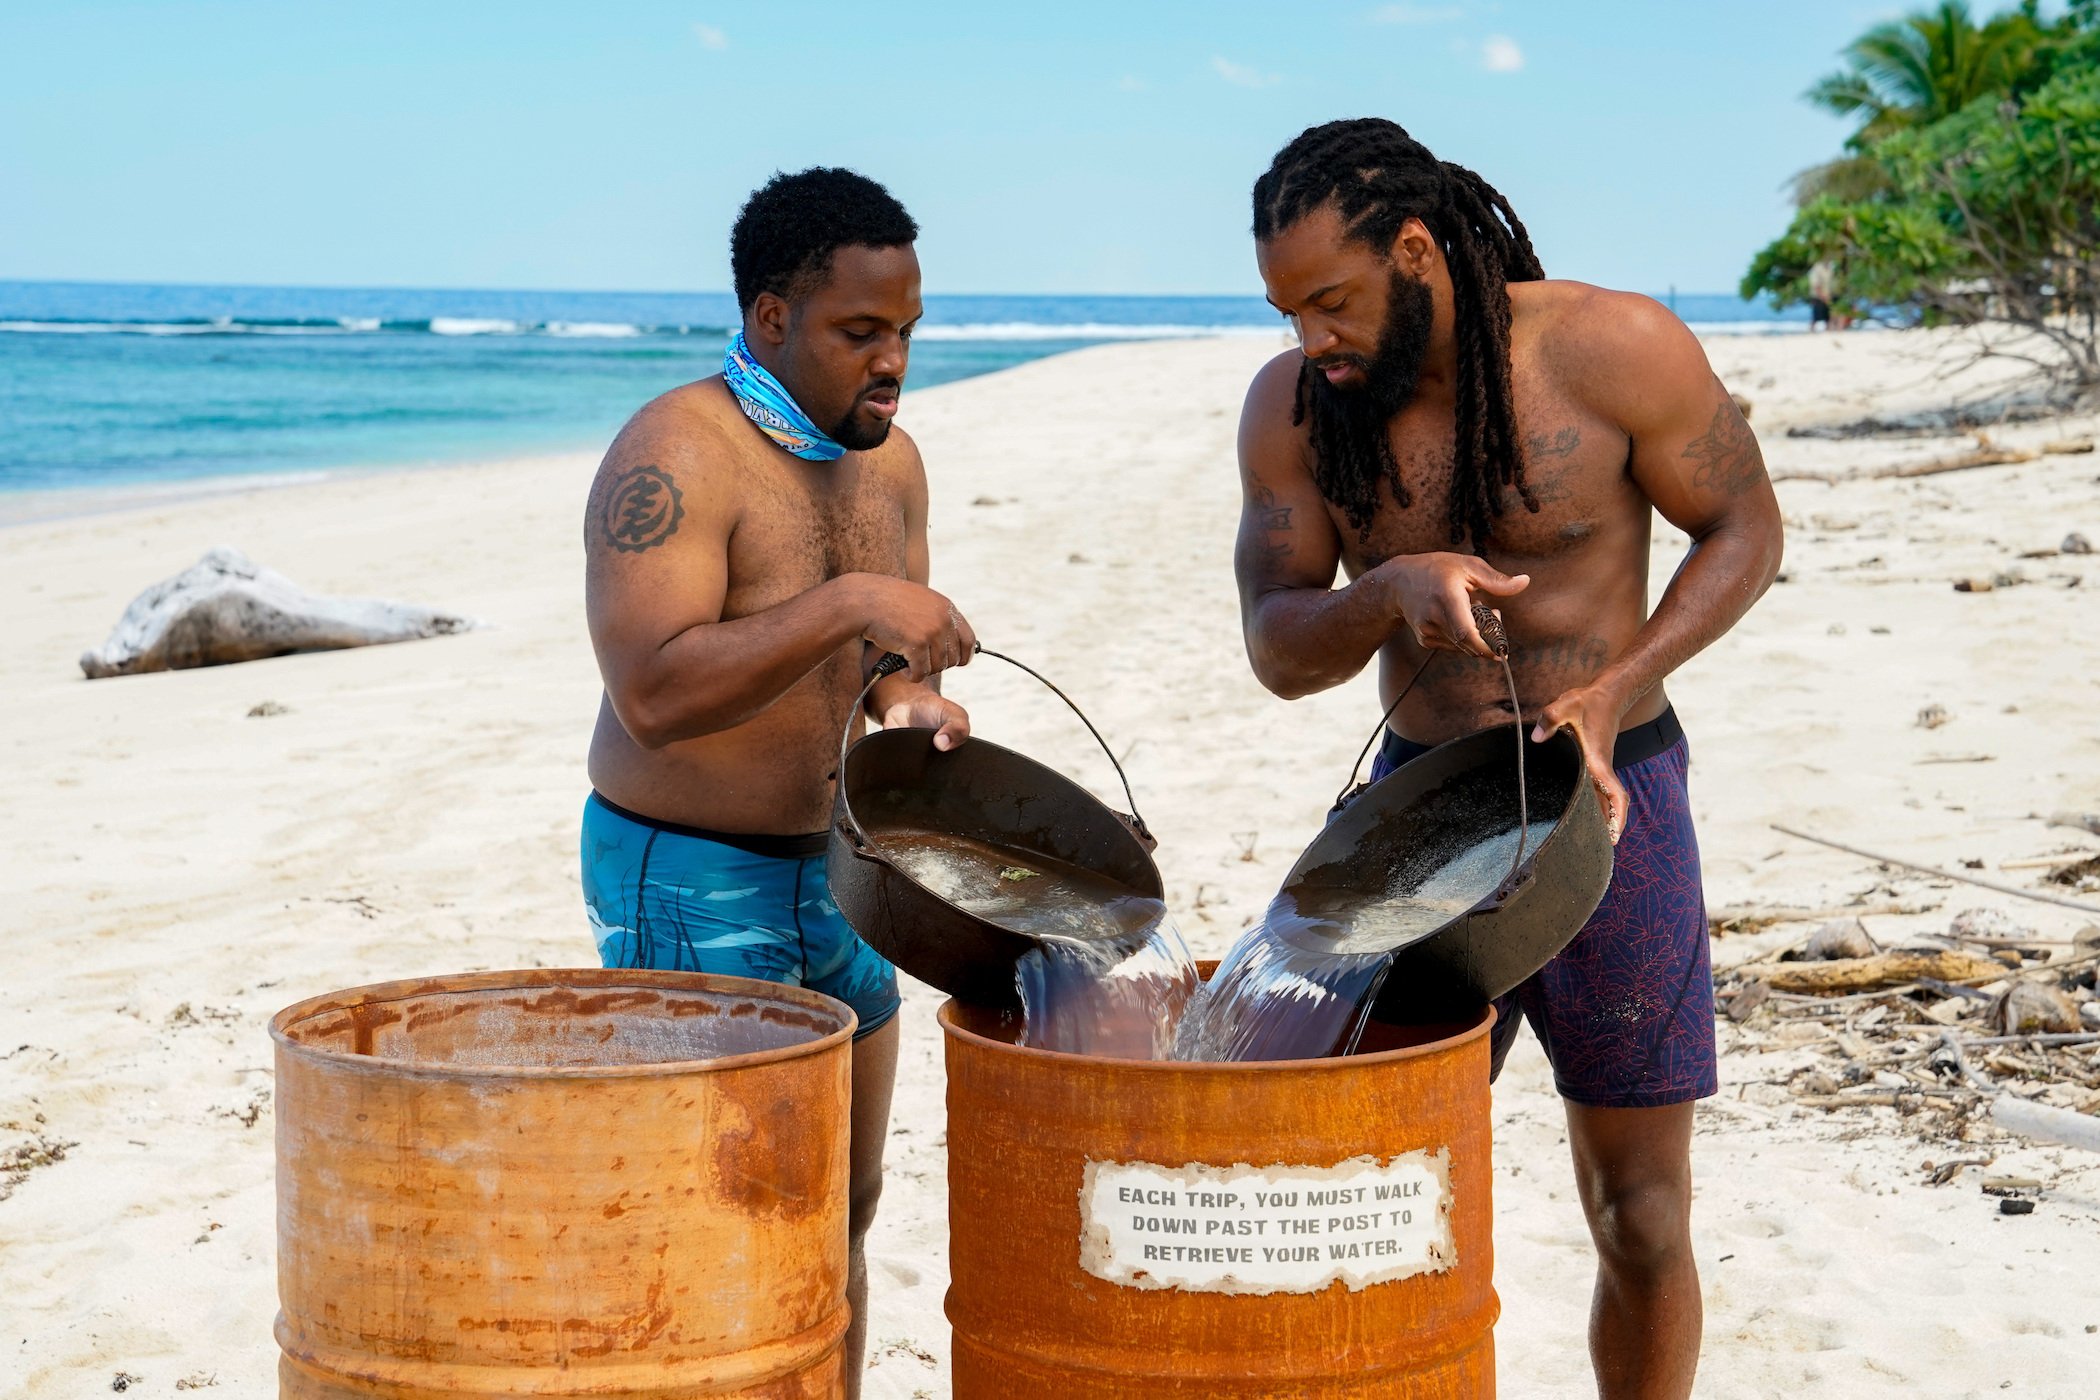 Deshawn Radden and Danny McCray, members of the 'Survivor' Season 41 cast, pouring water into a large barrel on the beach